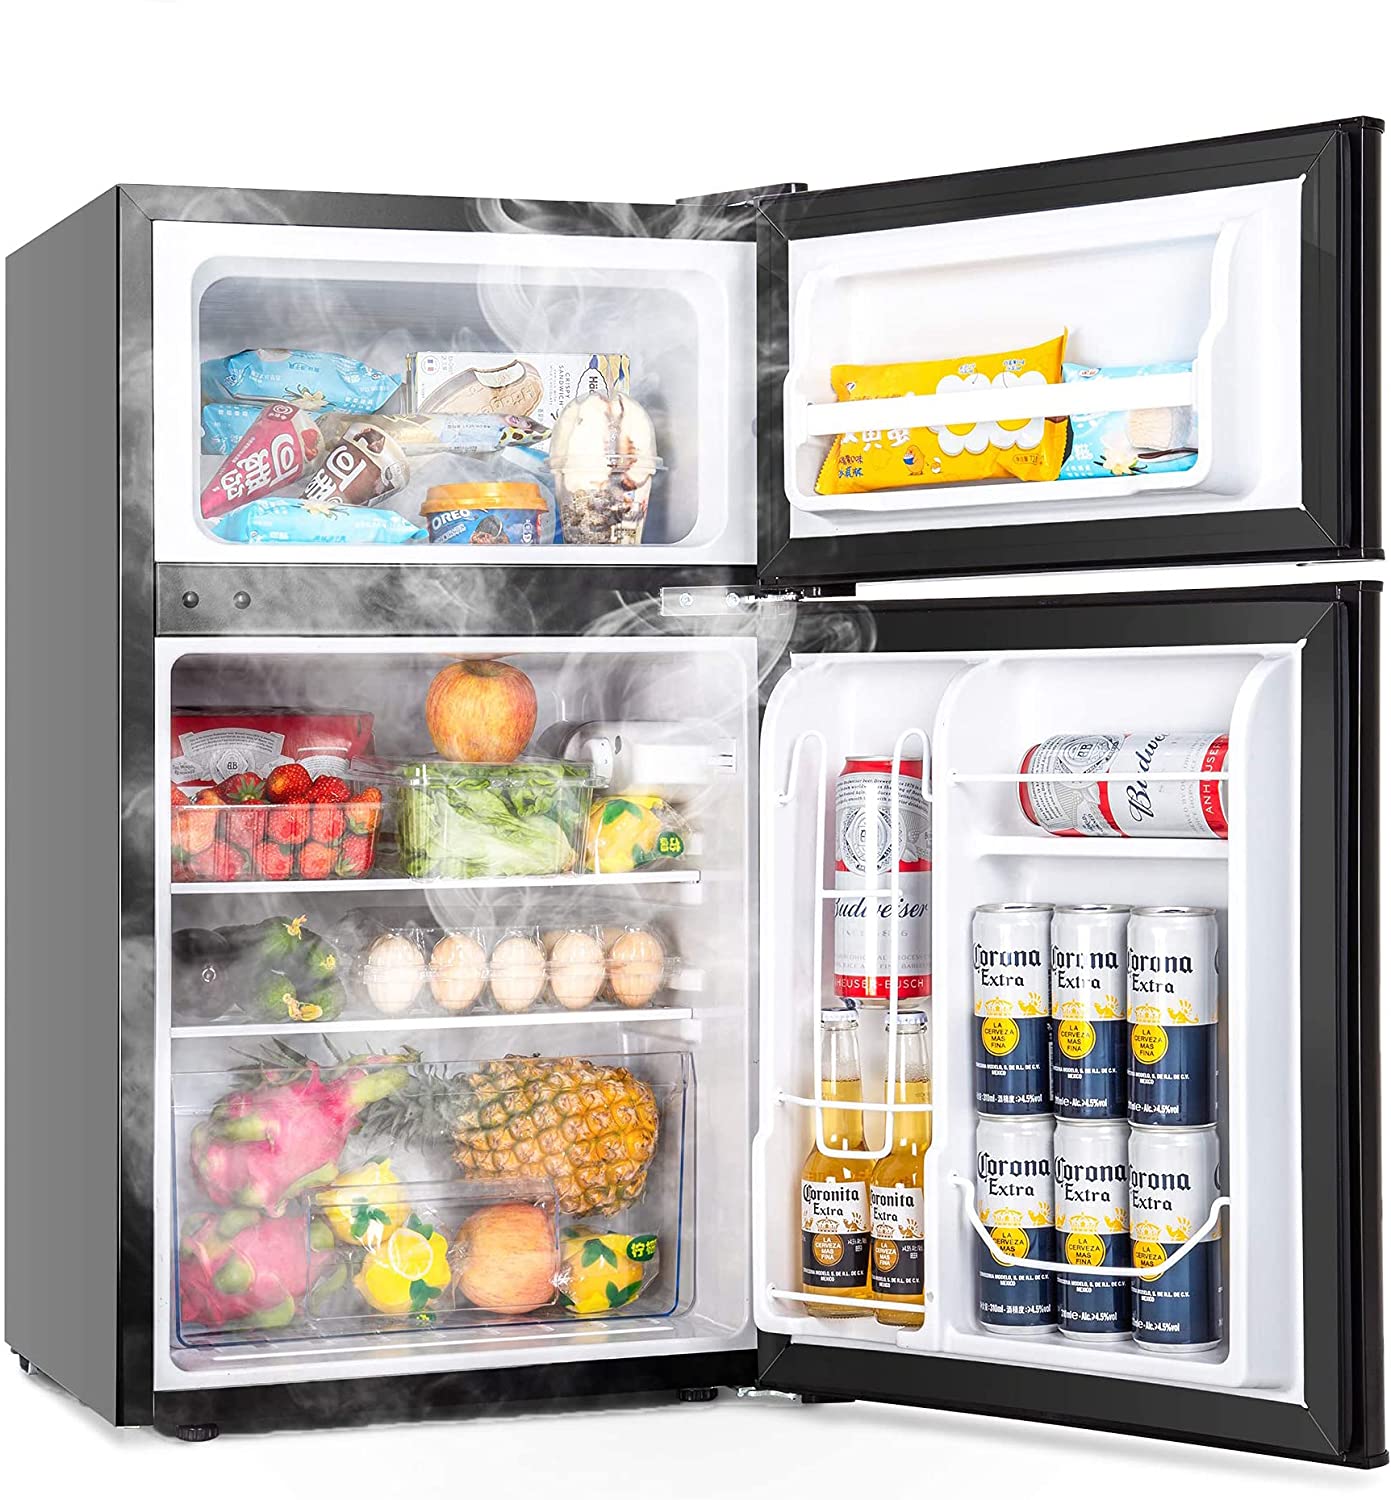 10 Best Garage Refrigerator 2022 Review: Best Second Mini Fridge with Freezer for Hot Summer/ Garage All In One Cooling Gear Lab: Any Refrigerators Air Conditioners Freezers Ice Makers Coolers Fans Reviewed And Compared.